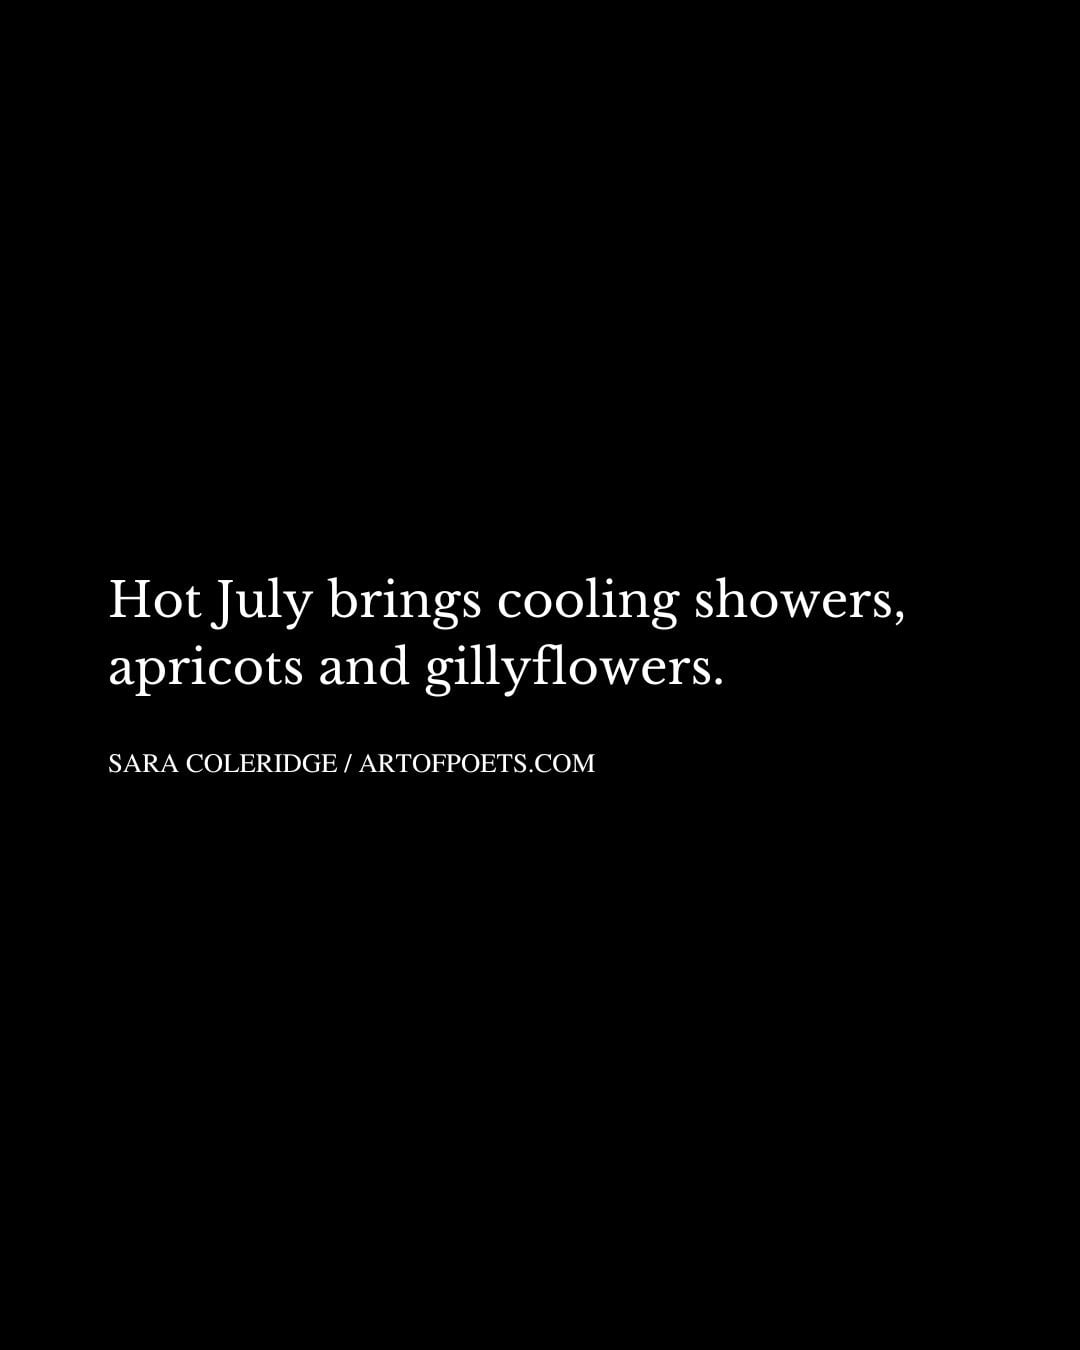 Hot July brings cooling showers apricots and gillyflowers